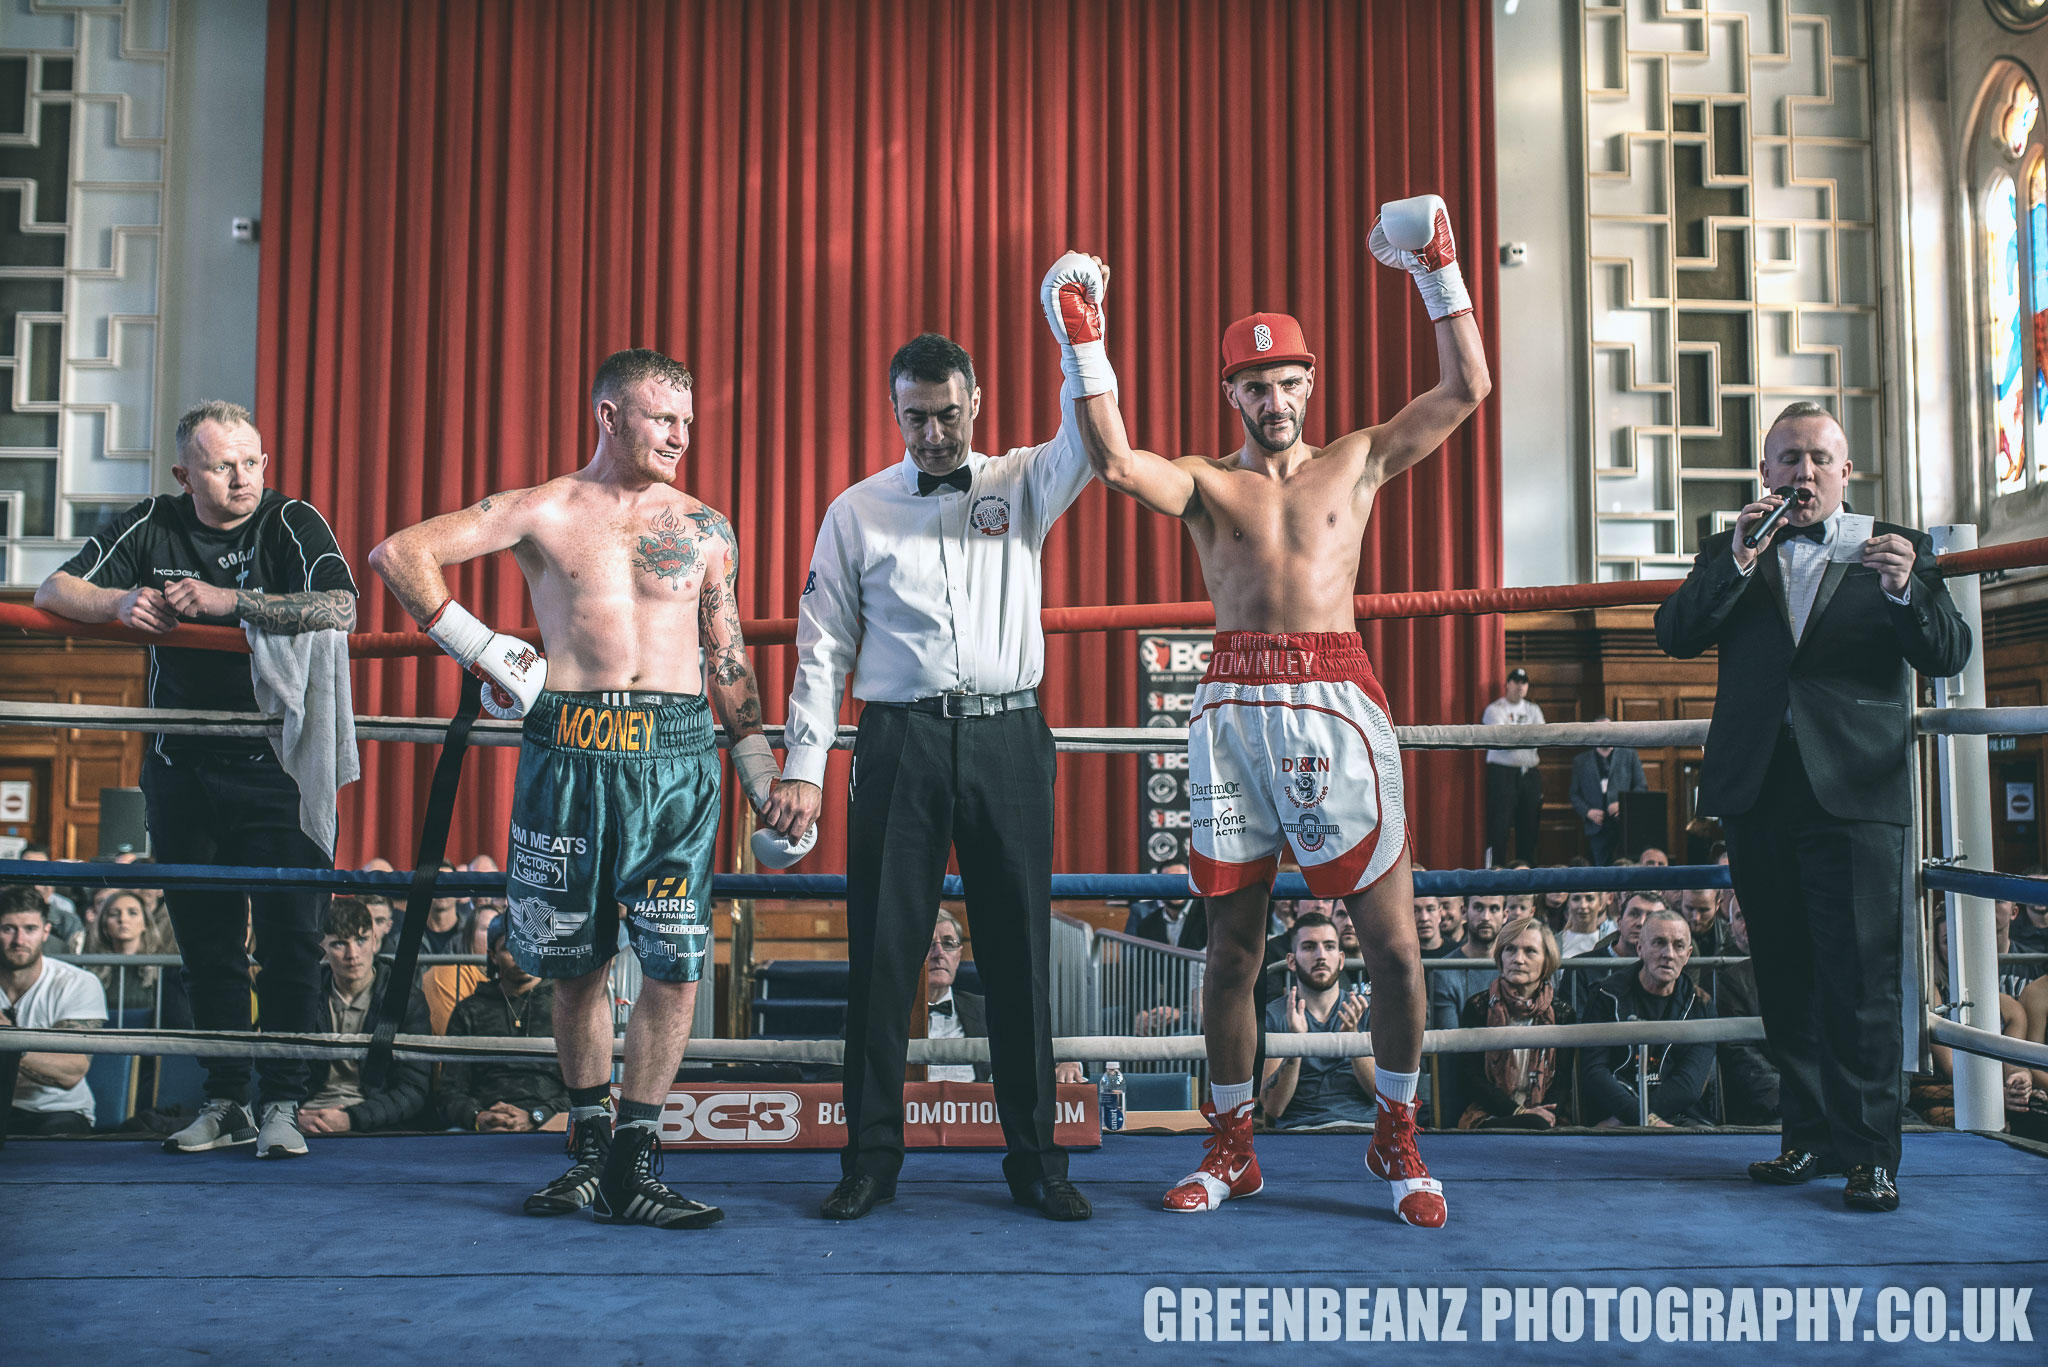 Reff raising the hand of winning boxer Darren Townley at Plymouth Guildhall 